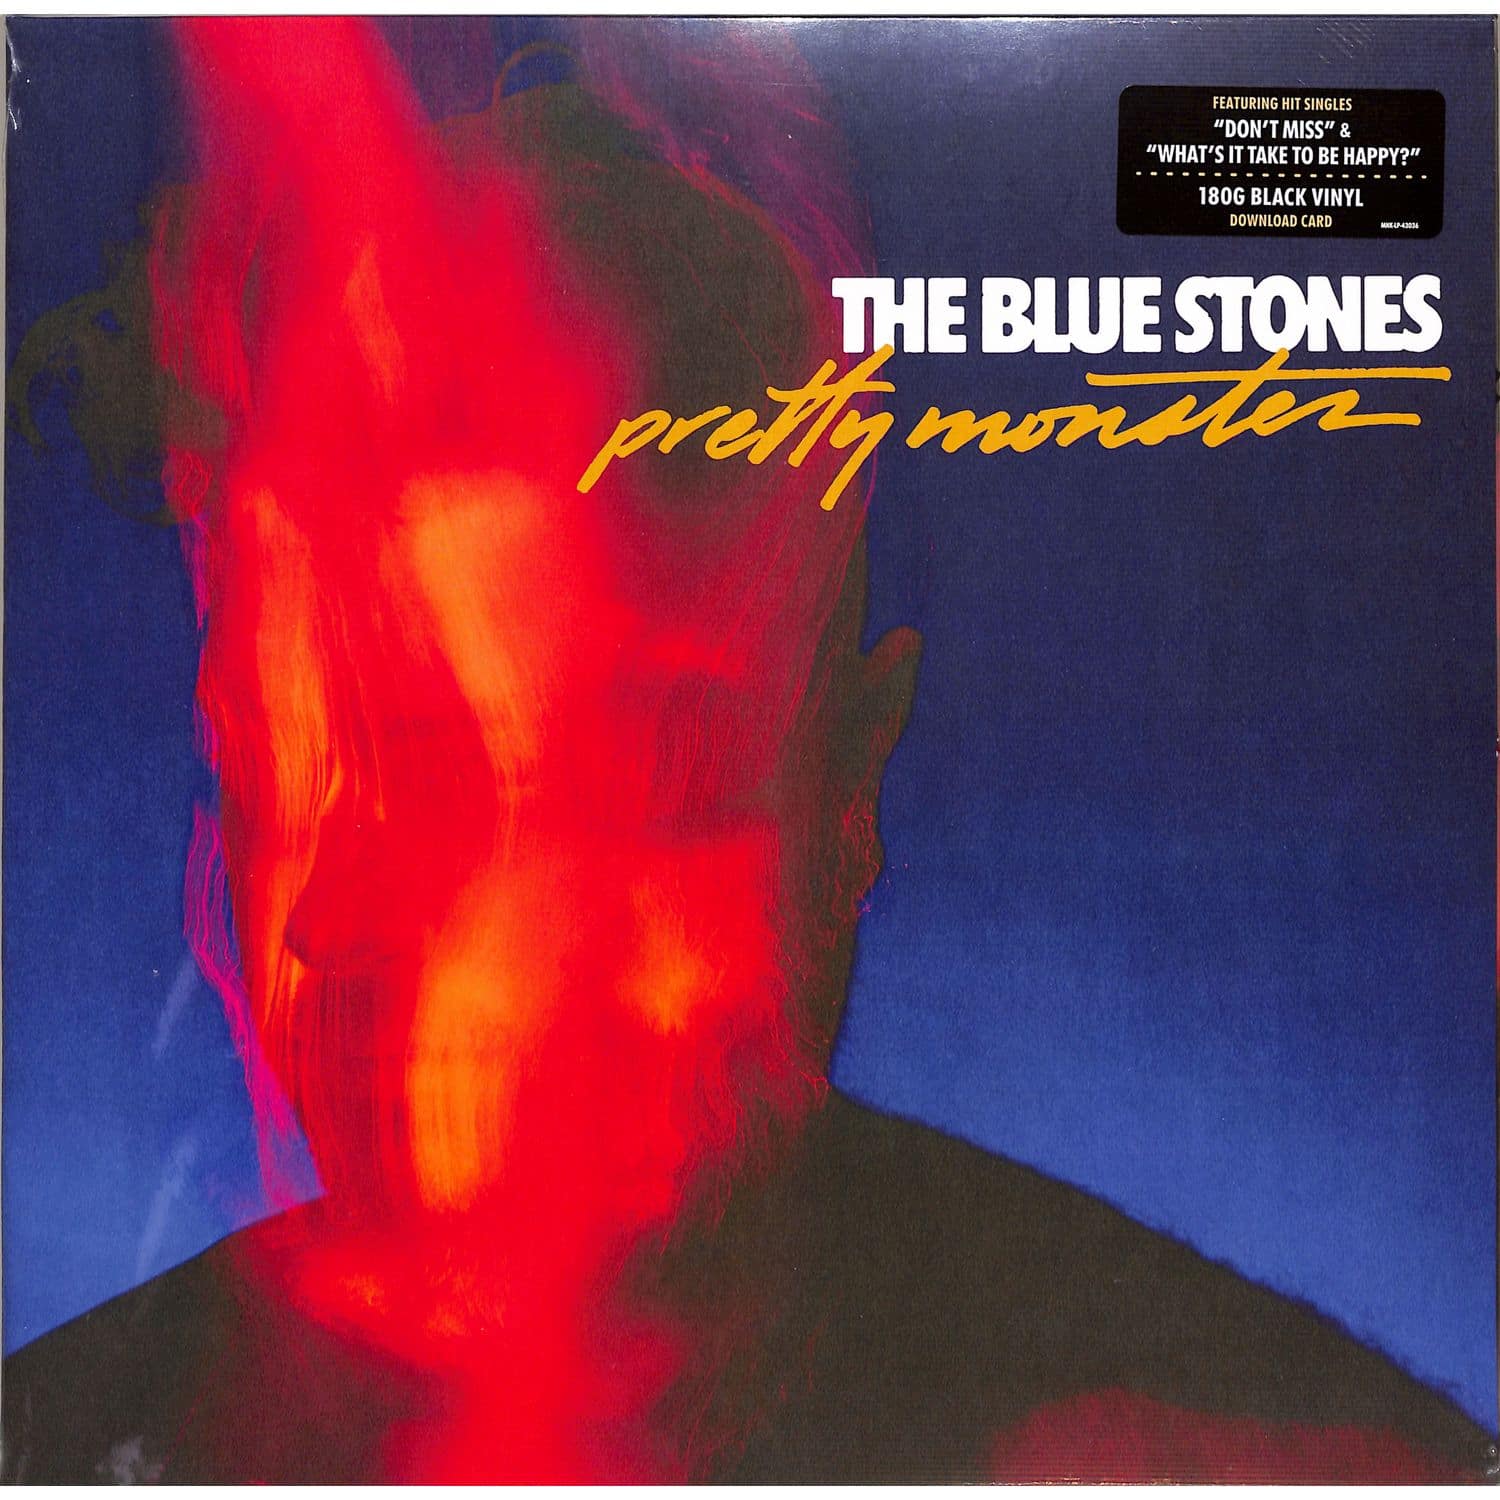 The Blue Stones - PRETTY MONSTER 